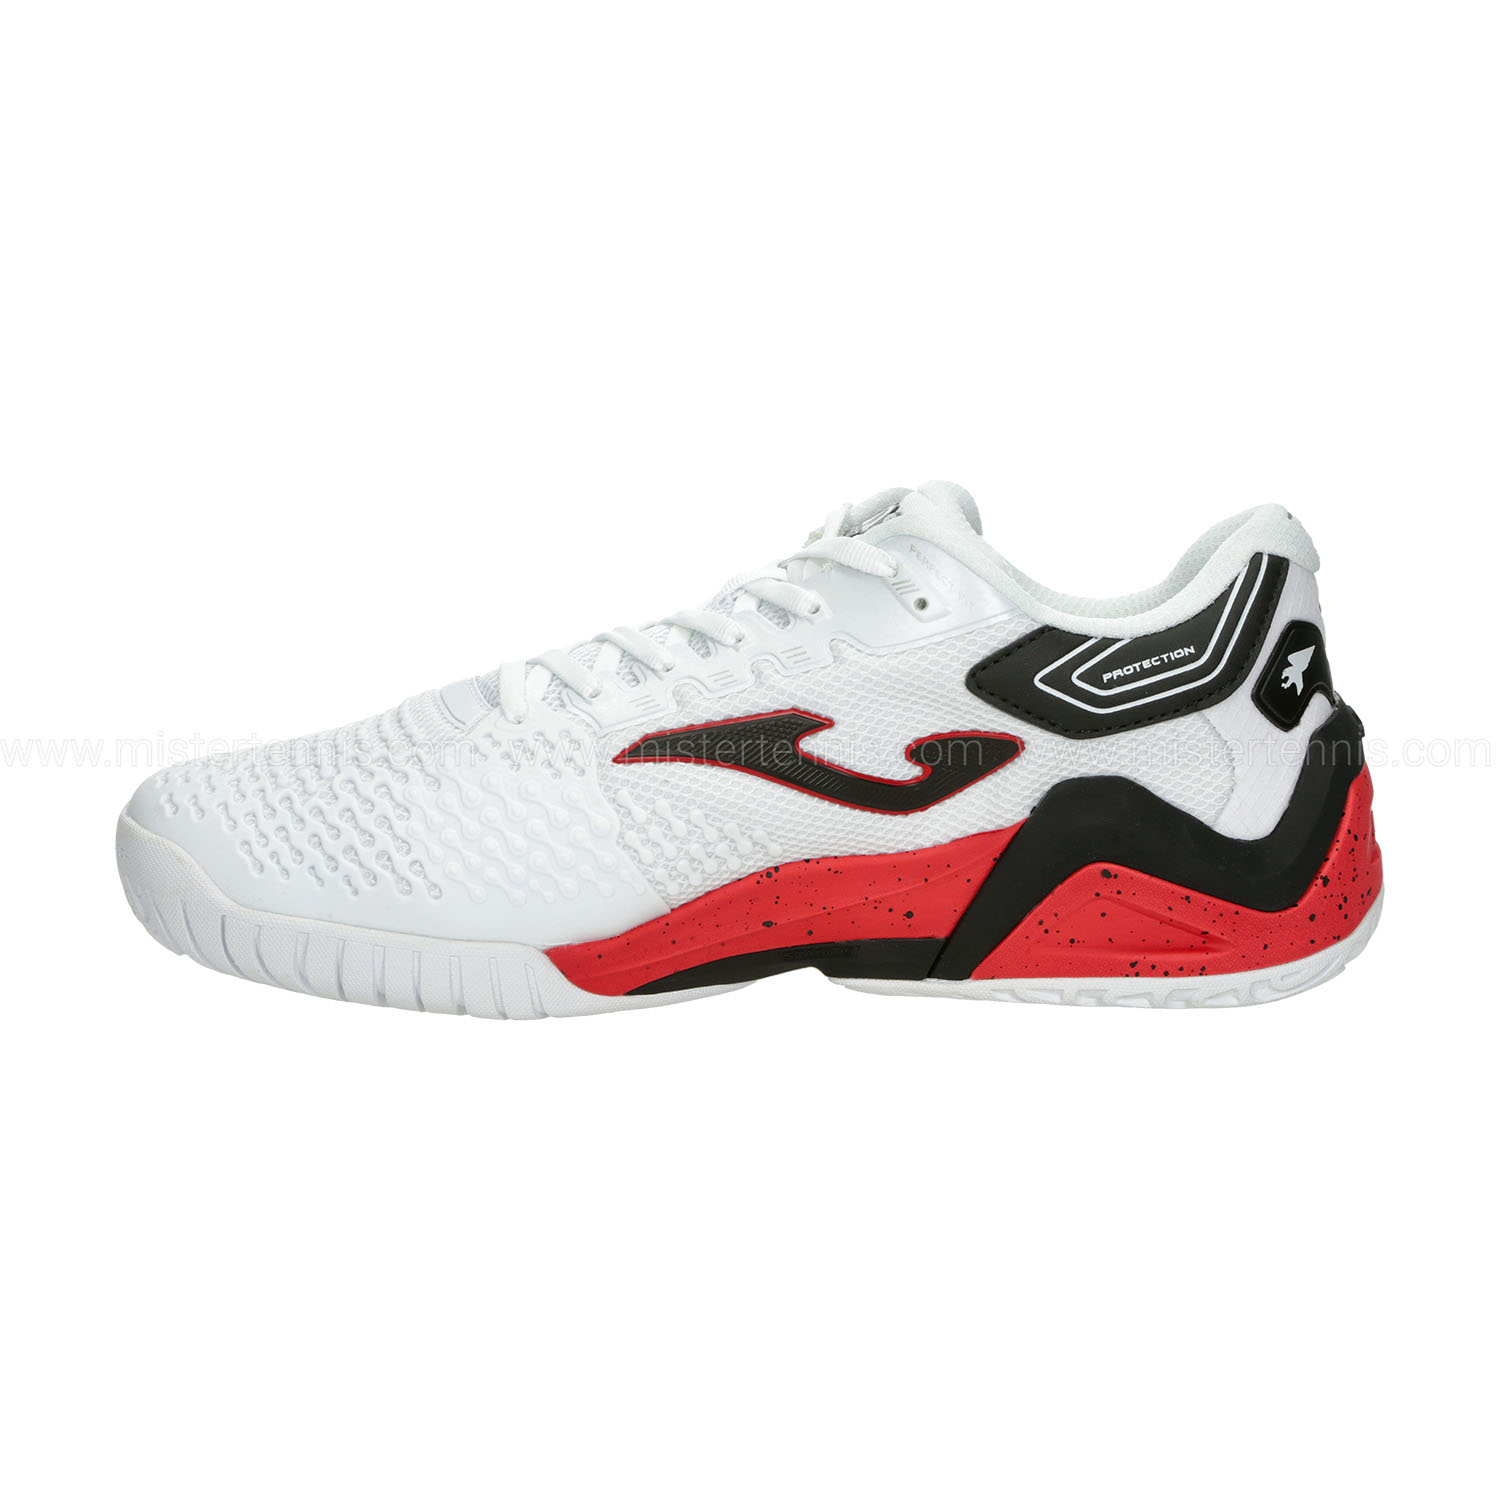 Joma Ace Pro Men's Tennis Shoes - White/Red